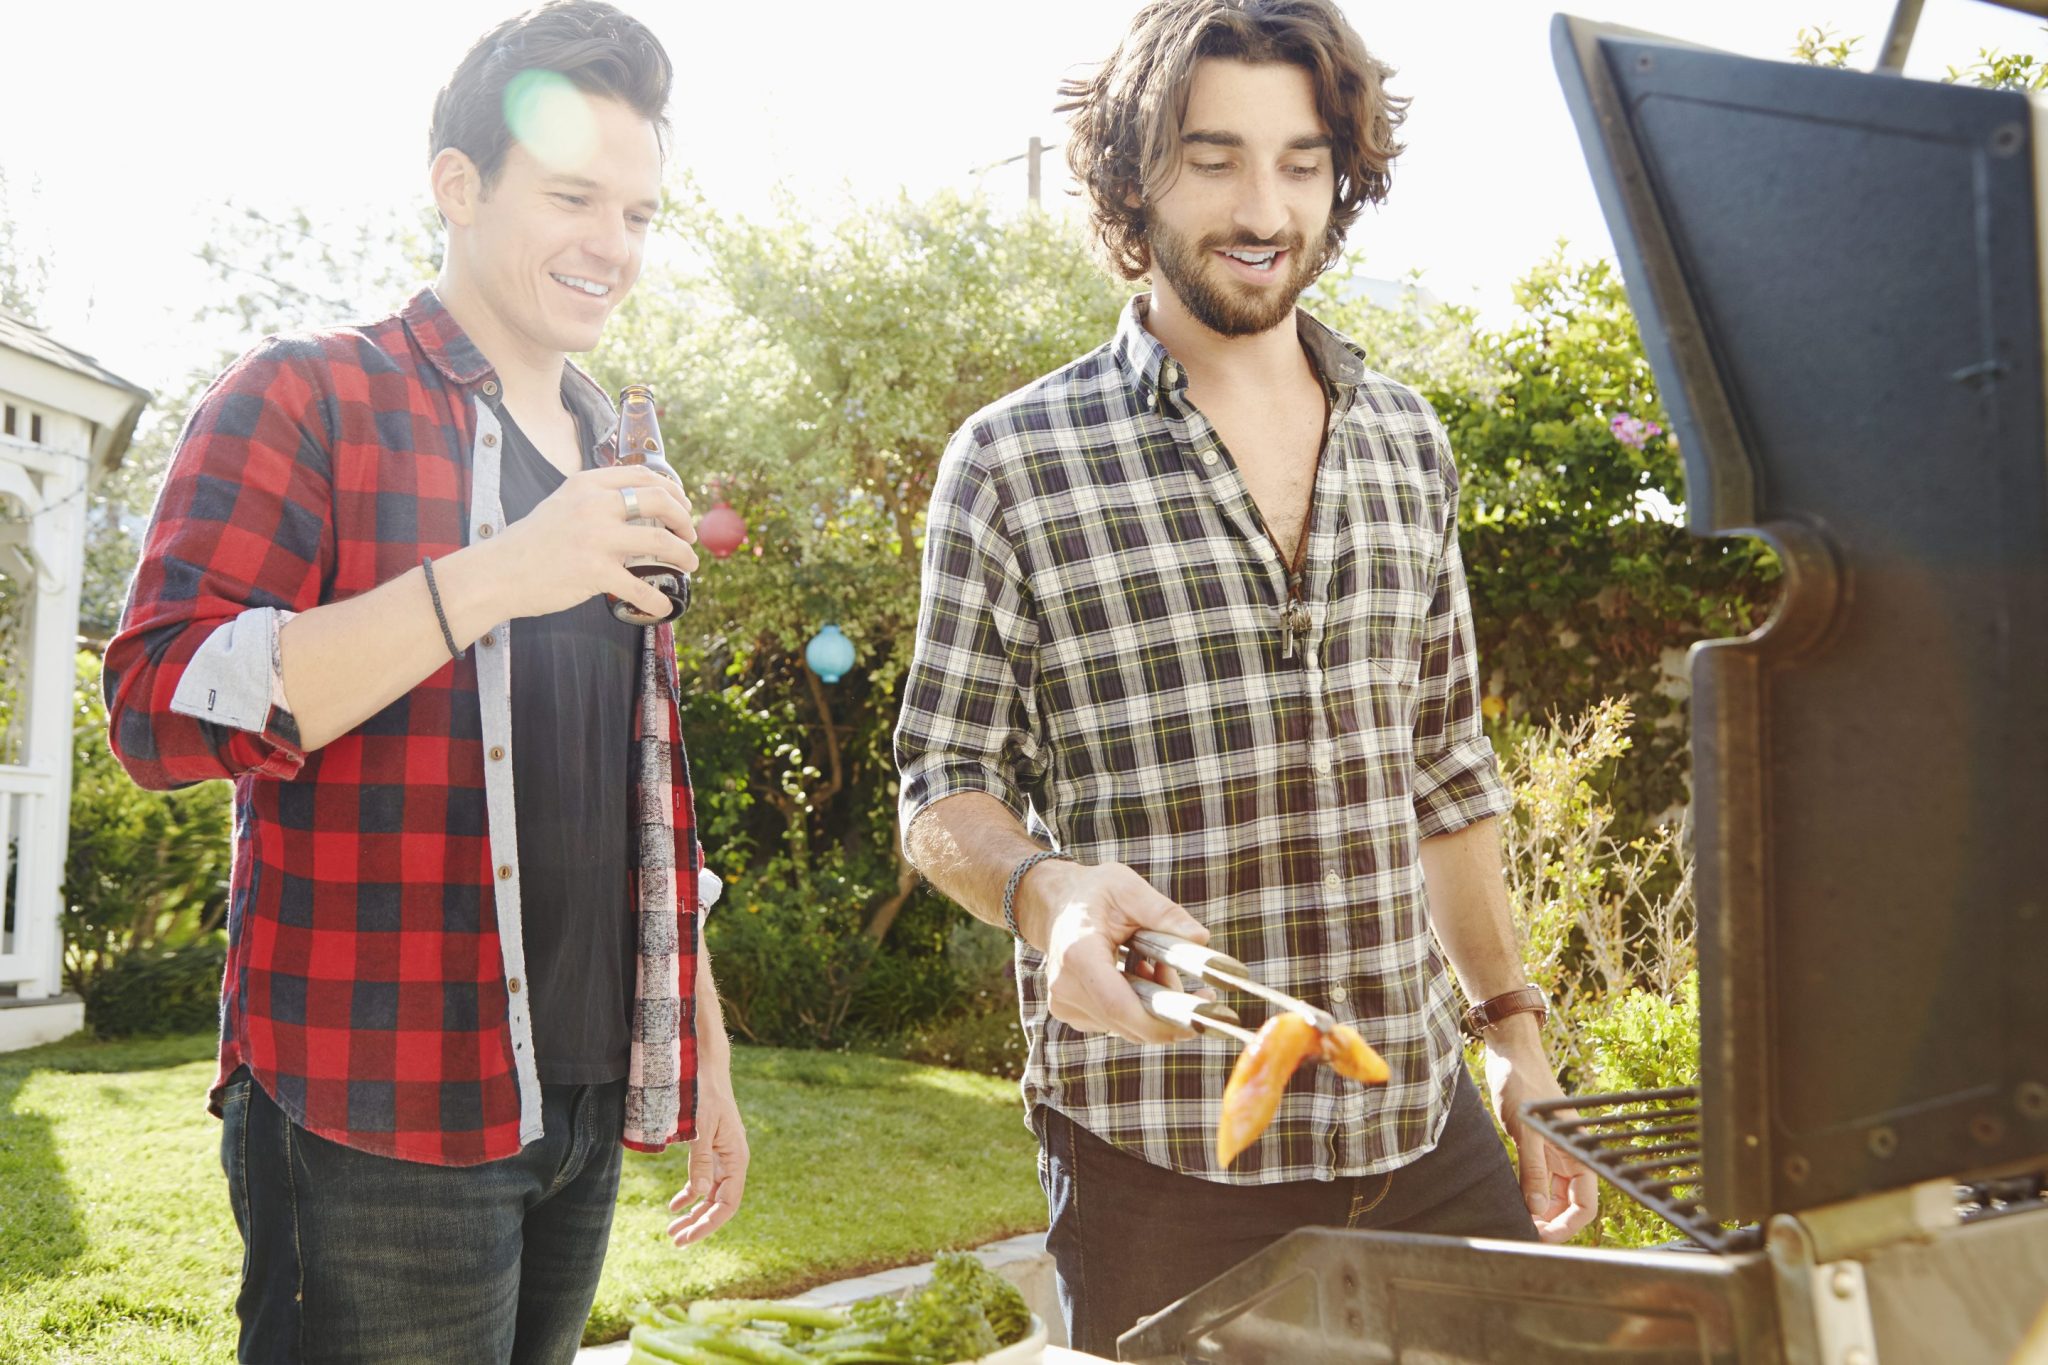 Artificial intelligence comes to the backyard barbecue—and could double the market size